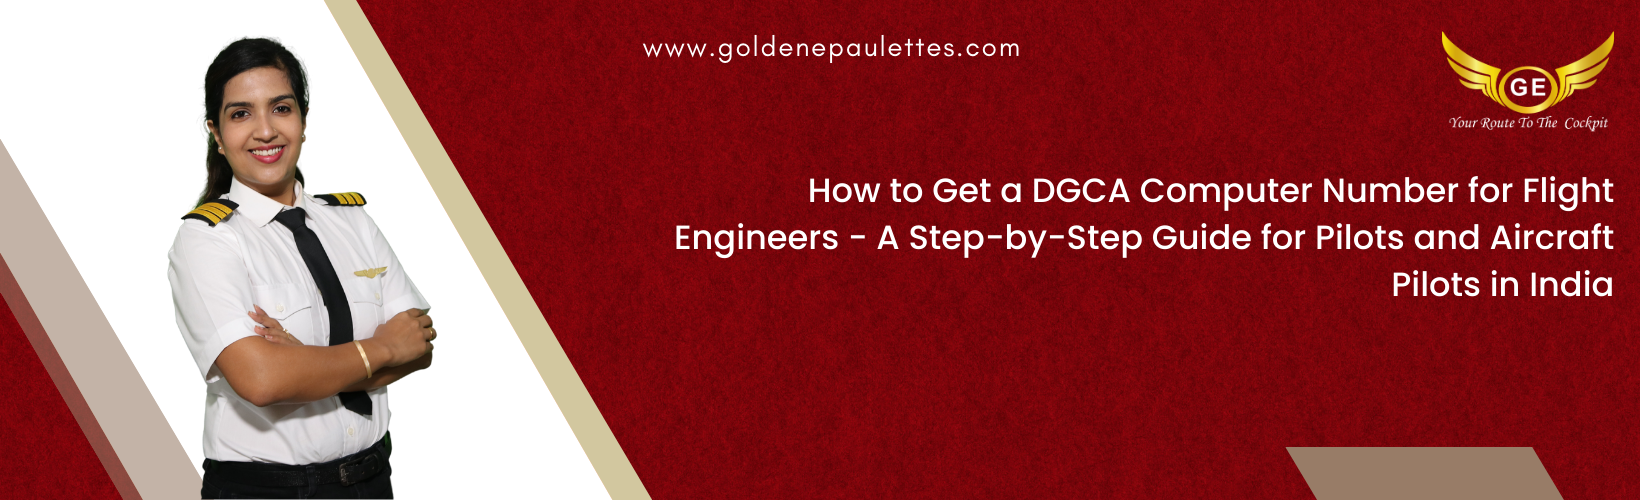 How to Obtain a DGCA Computer Number for Flight Engineers